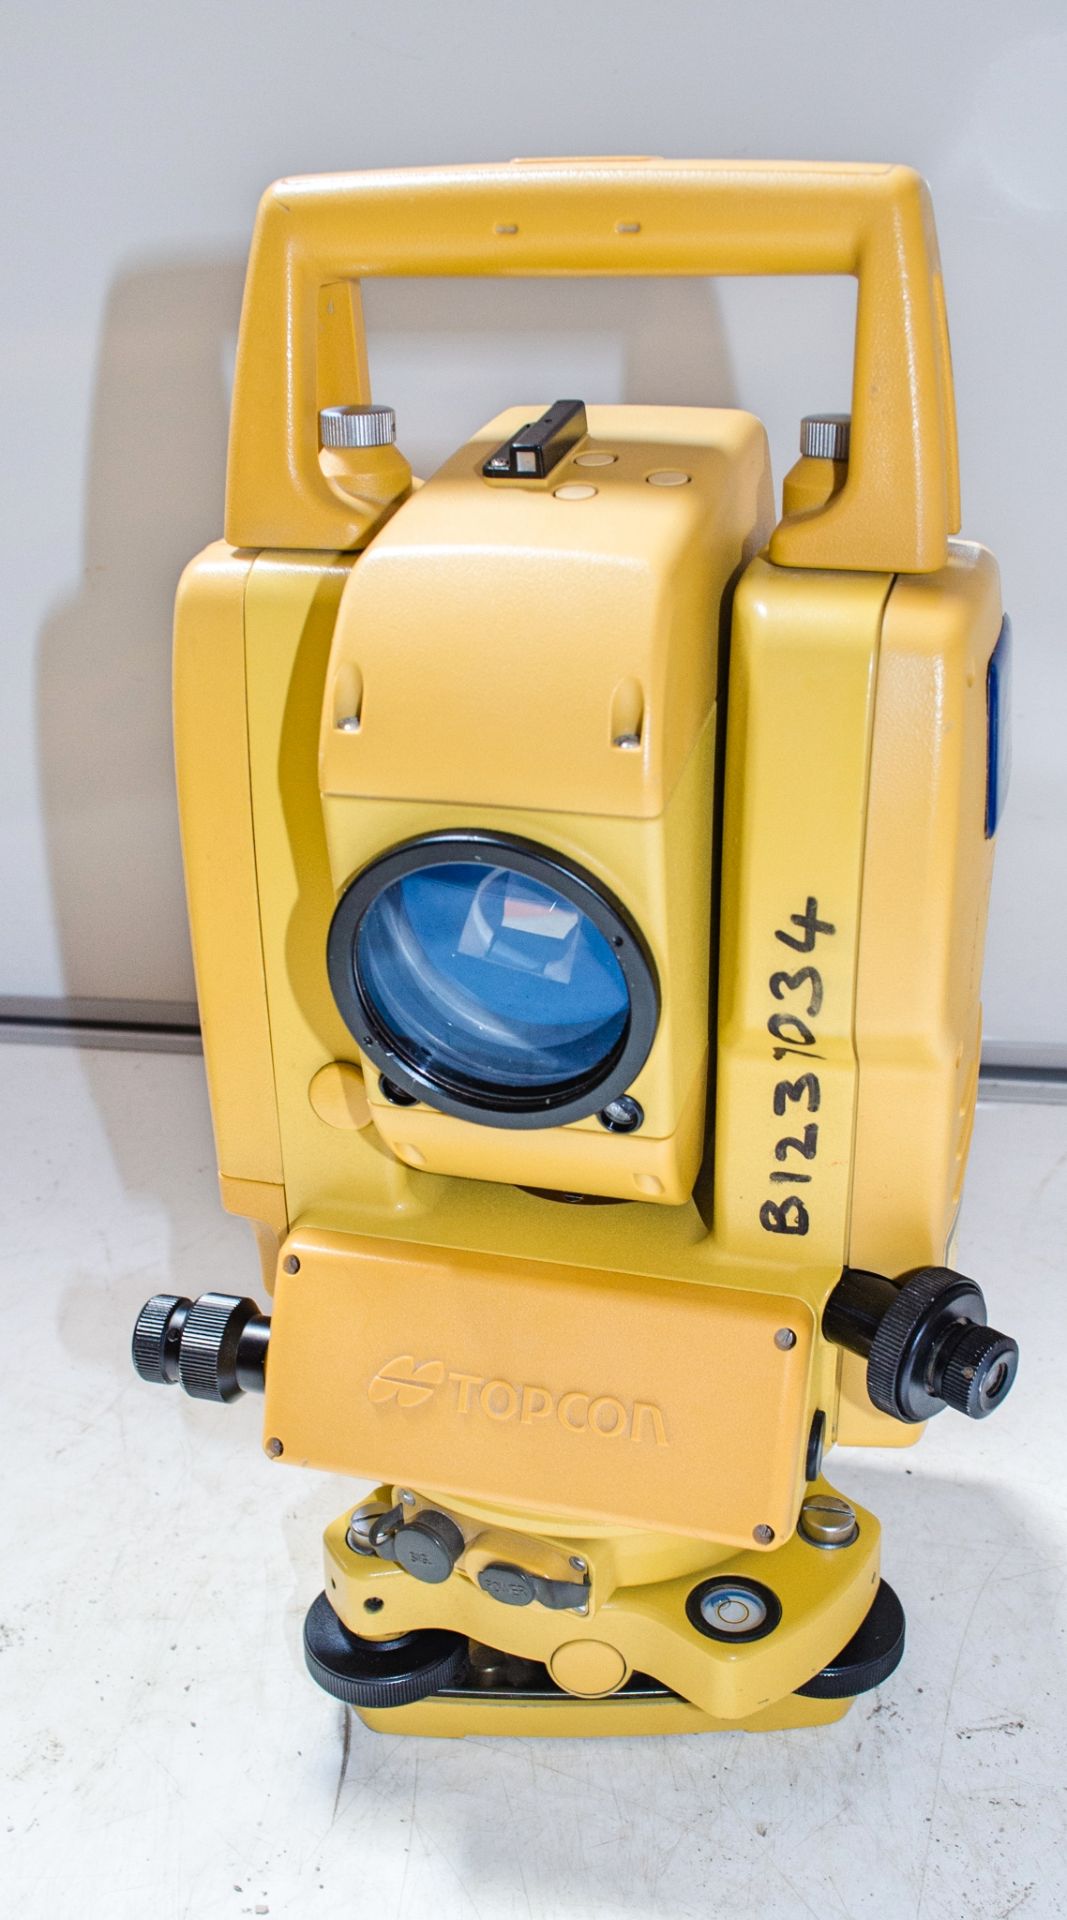 Topcon GPT 3107N total station c/w battery, charger & carry case B0367004 - Image 3 of 3